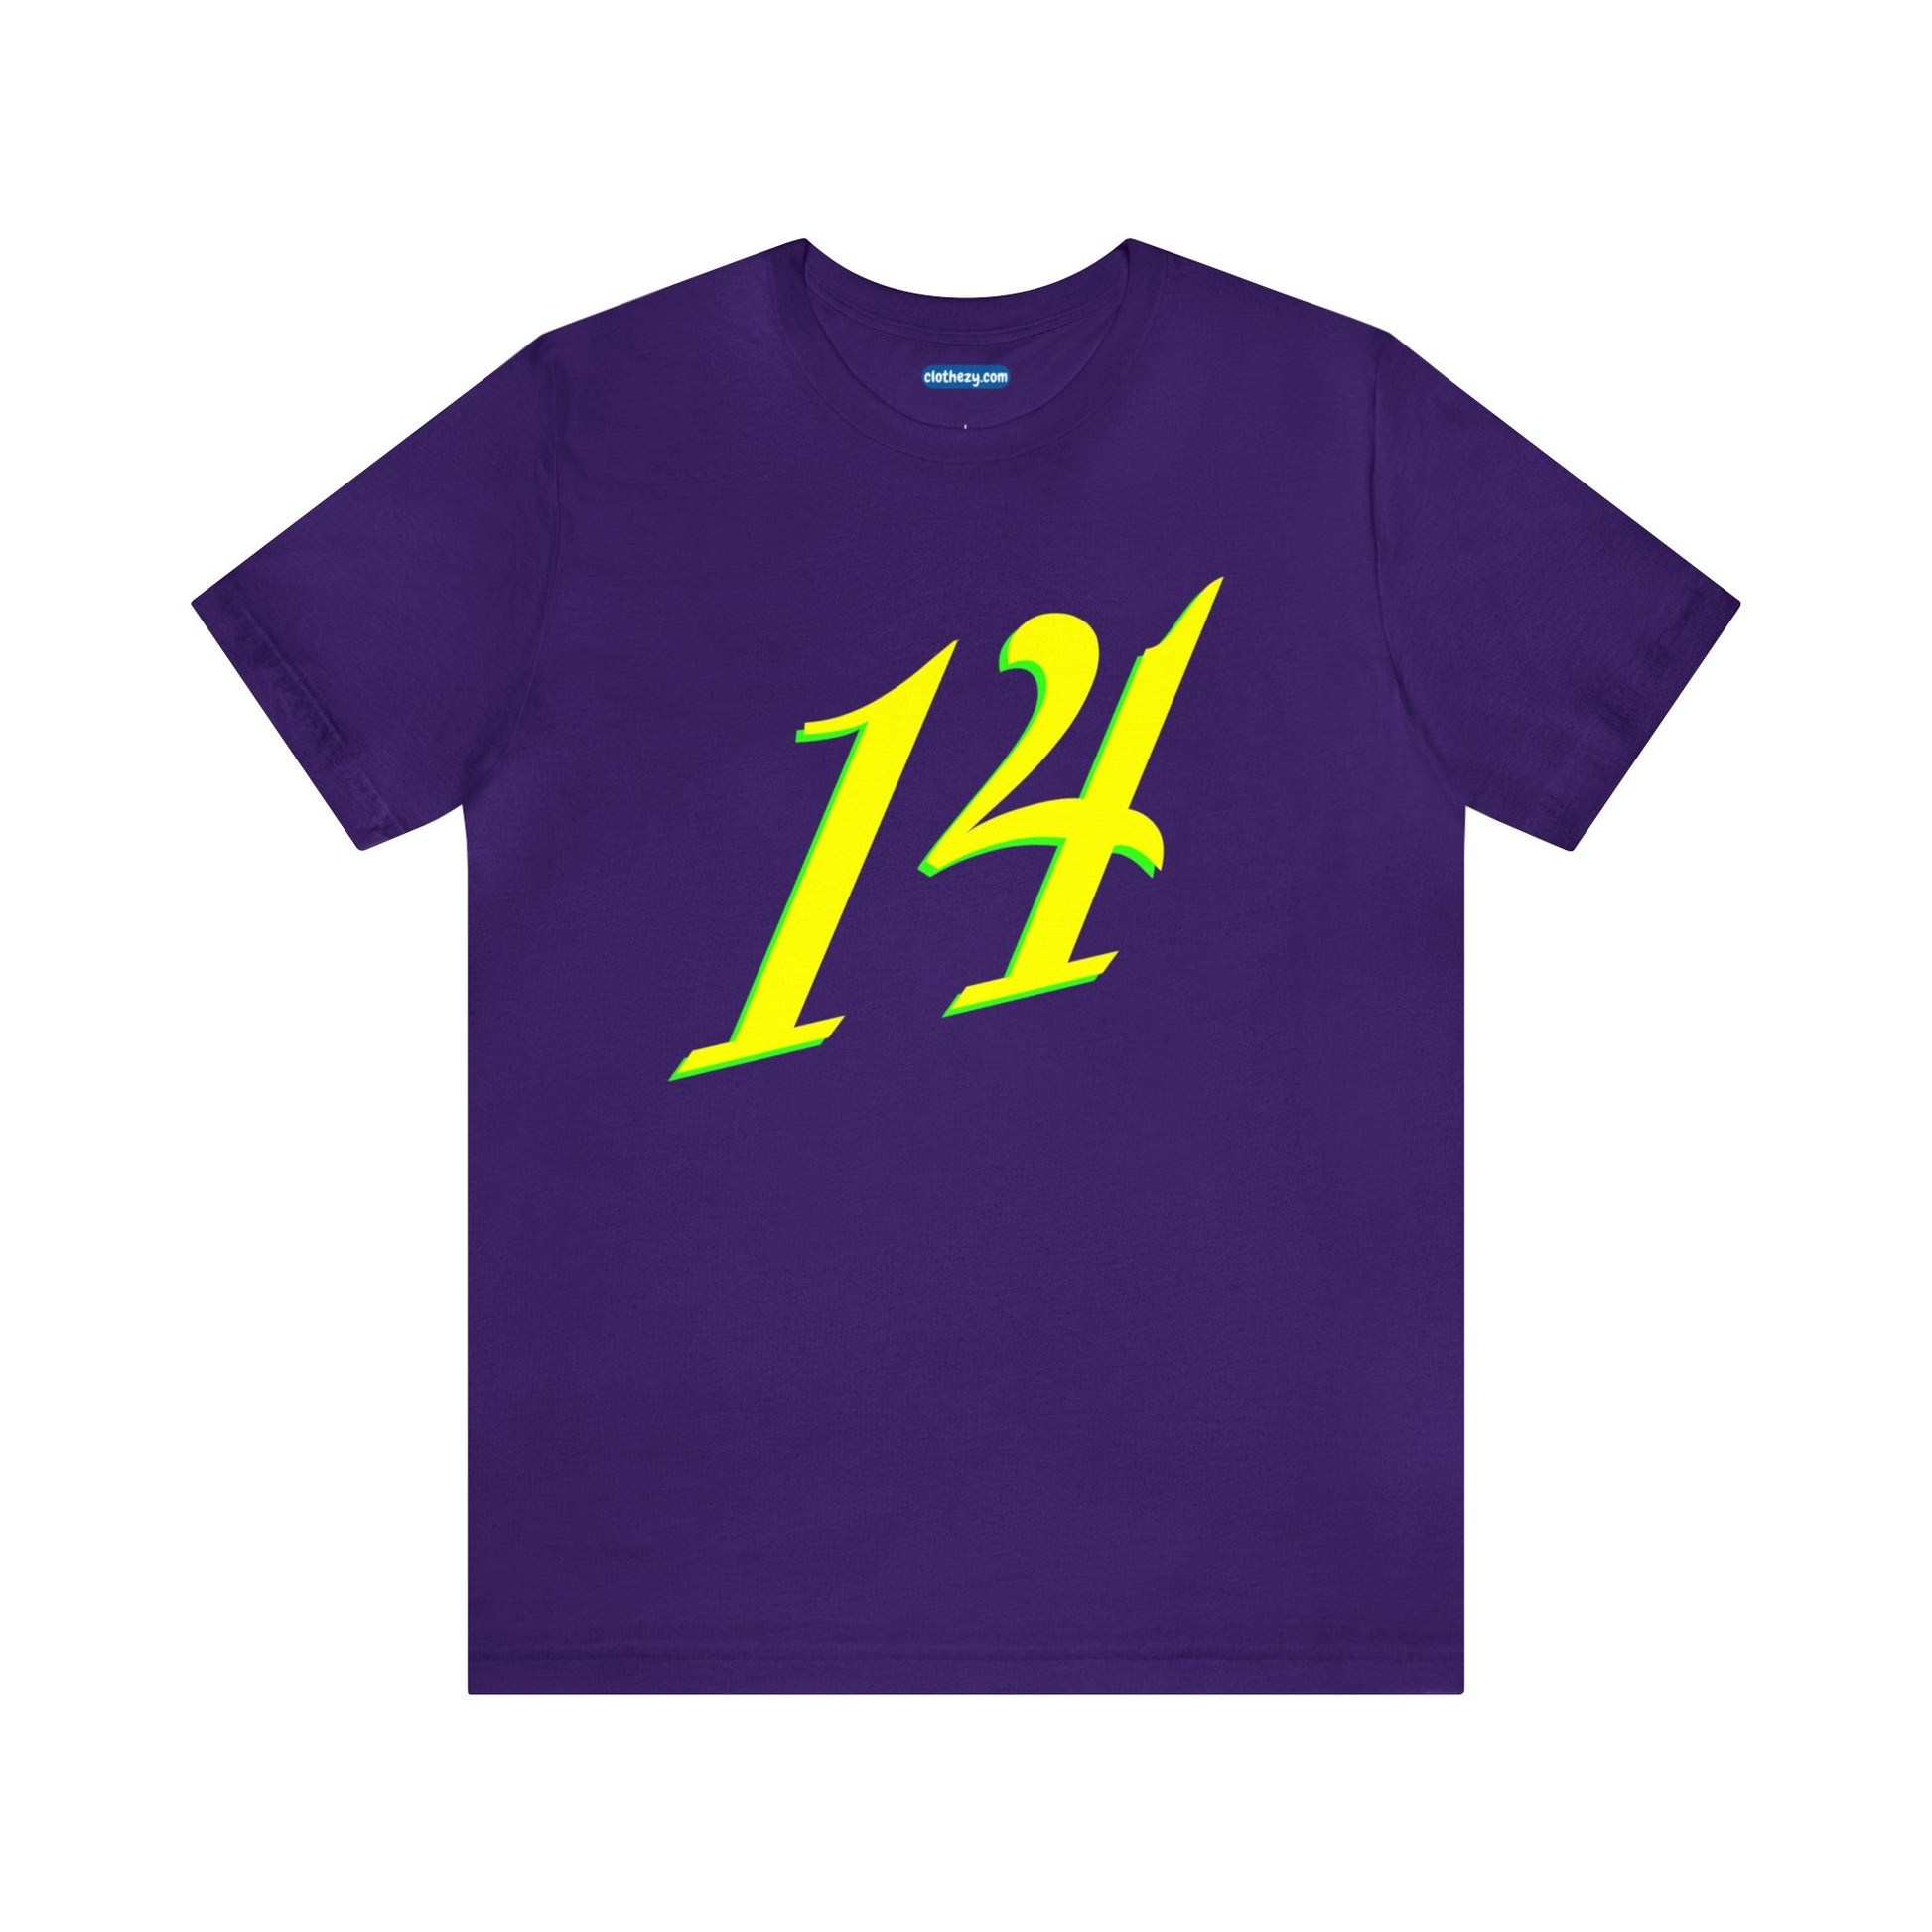 Number 14 Design - Soft Cotton Tee for birthdays and celebrations, Gift for friends and family, Multiple Options by clothezy.com in Purple Size Small - Buy Now